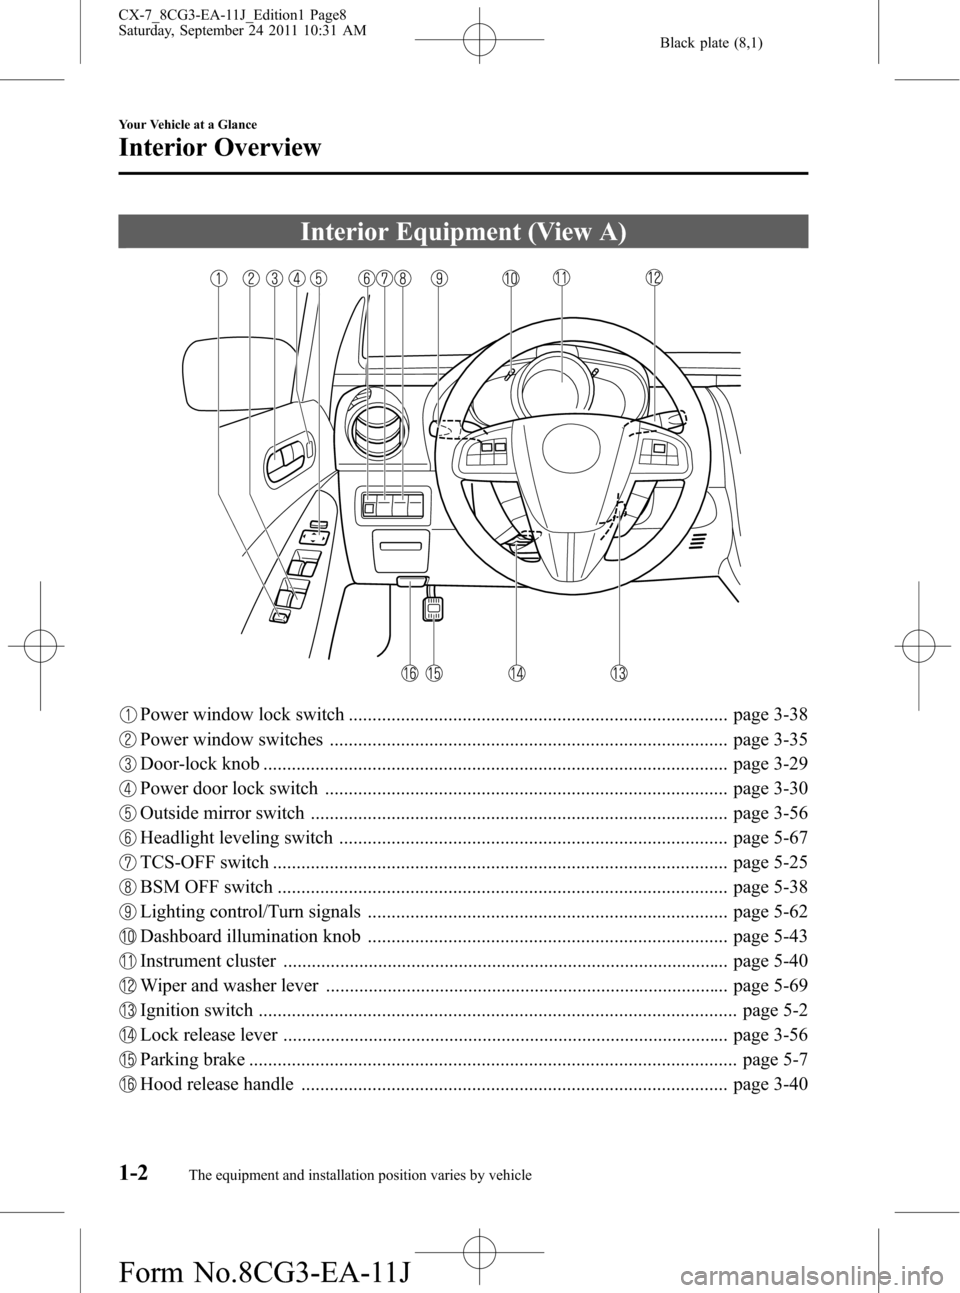 MAZDA MODEL CX-7 2012  Owners Manual (in English) Black plate (8,1)
Interior Equipment (View A)
Power window lock switch ................................................................................ page 3-38
Power window switches ................